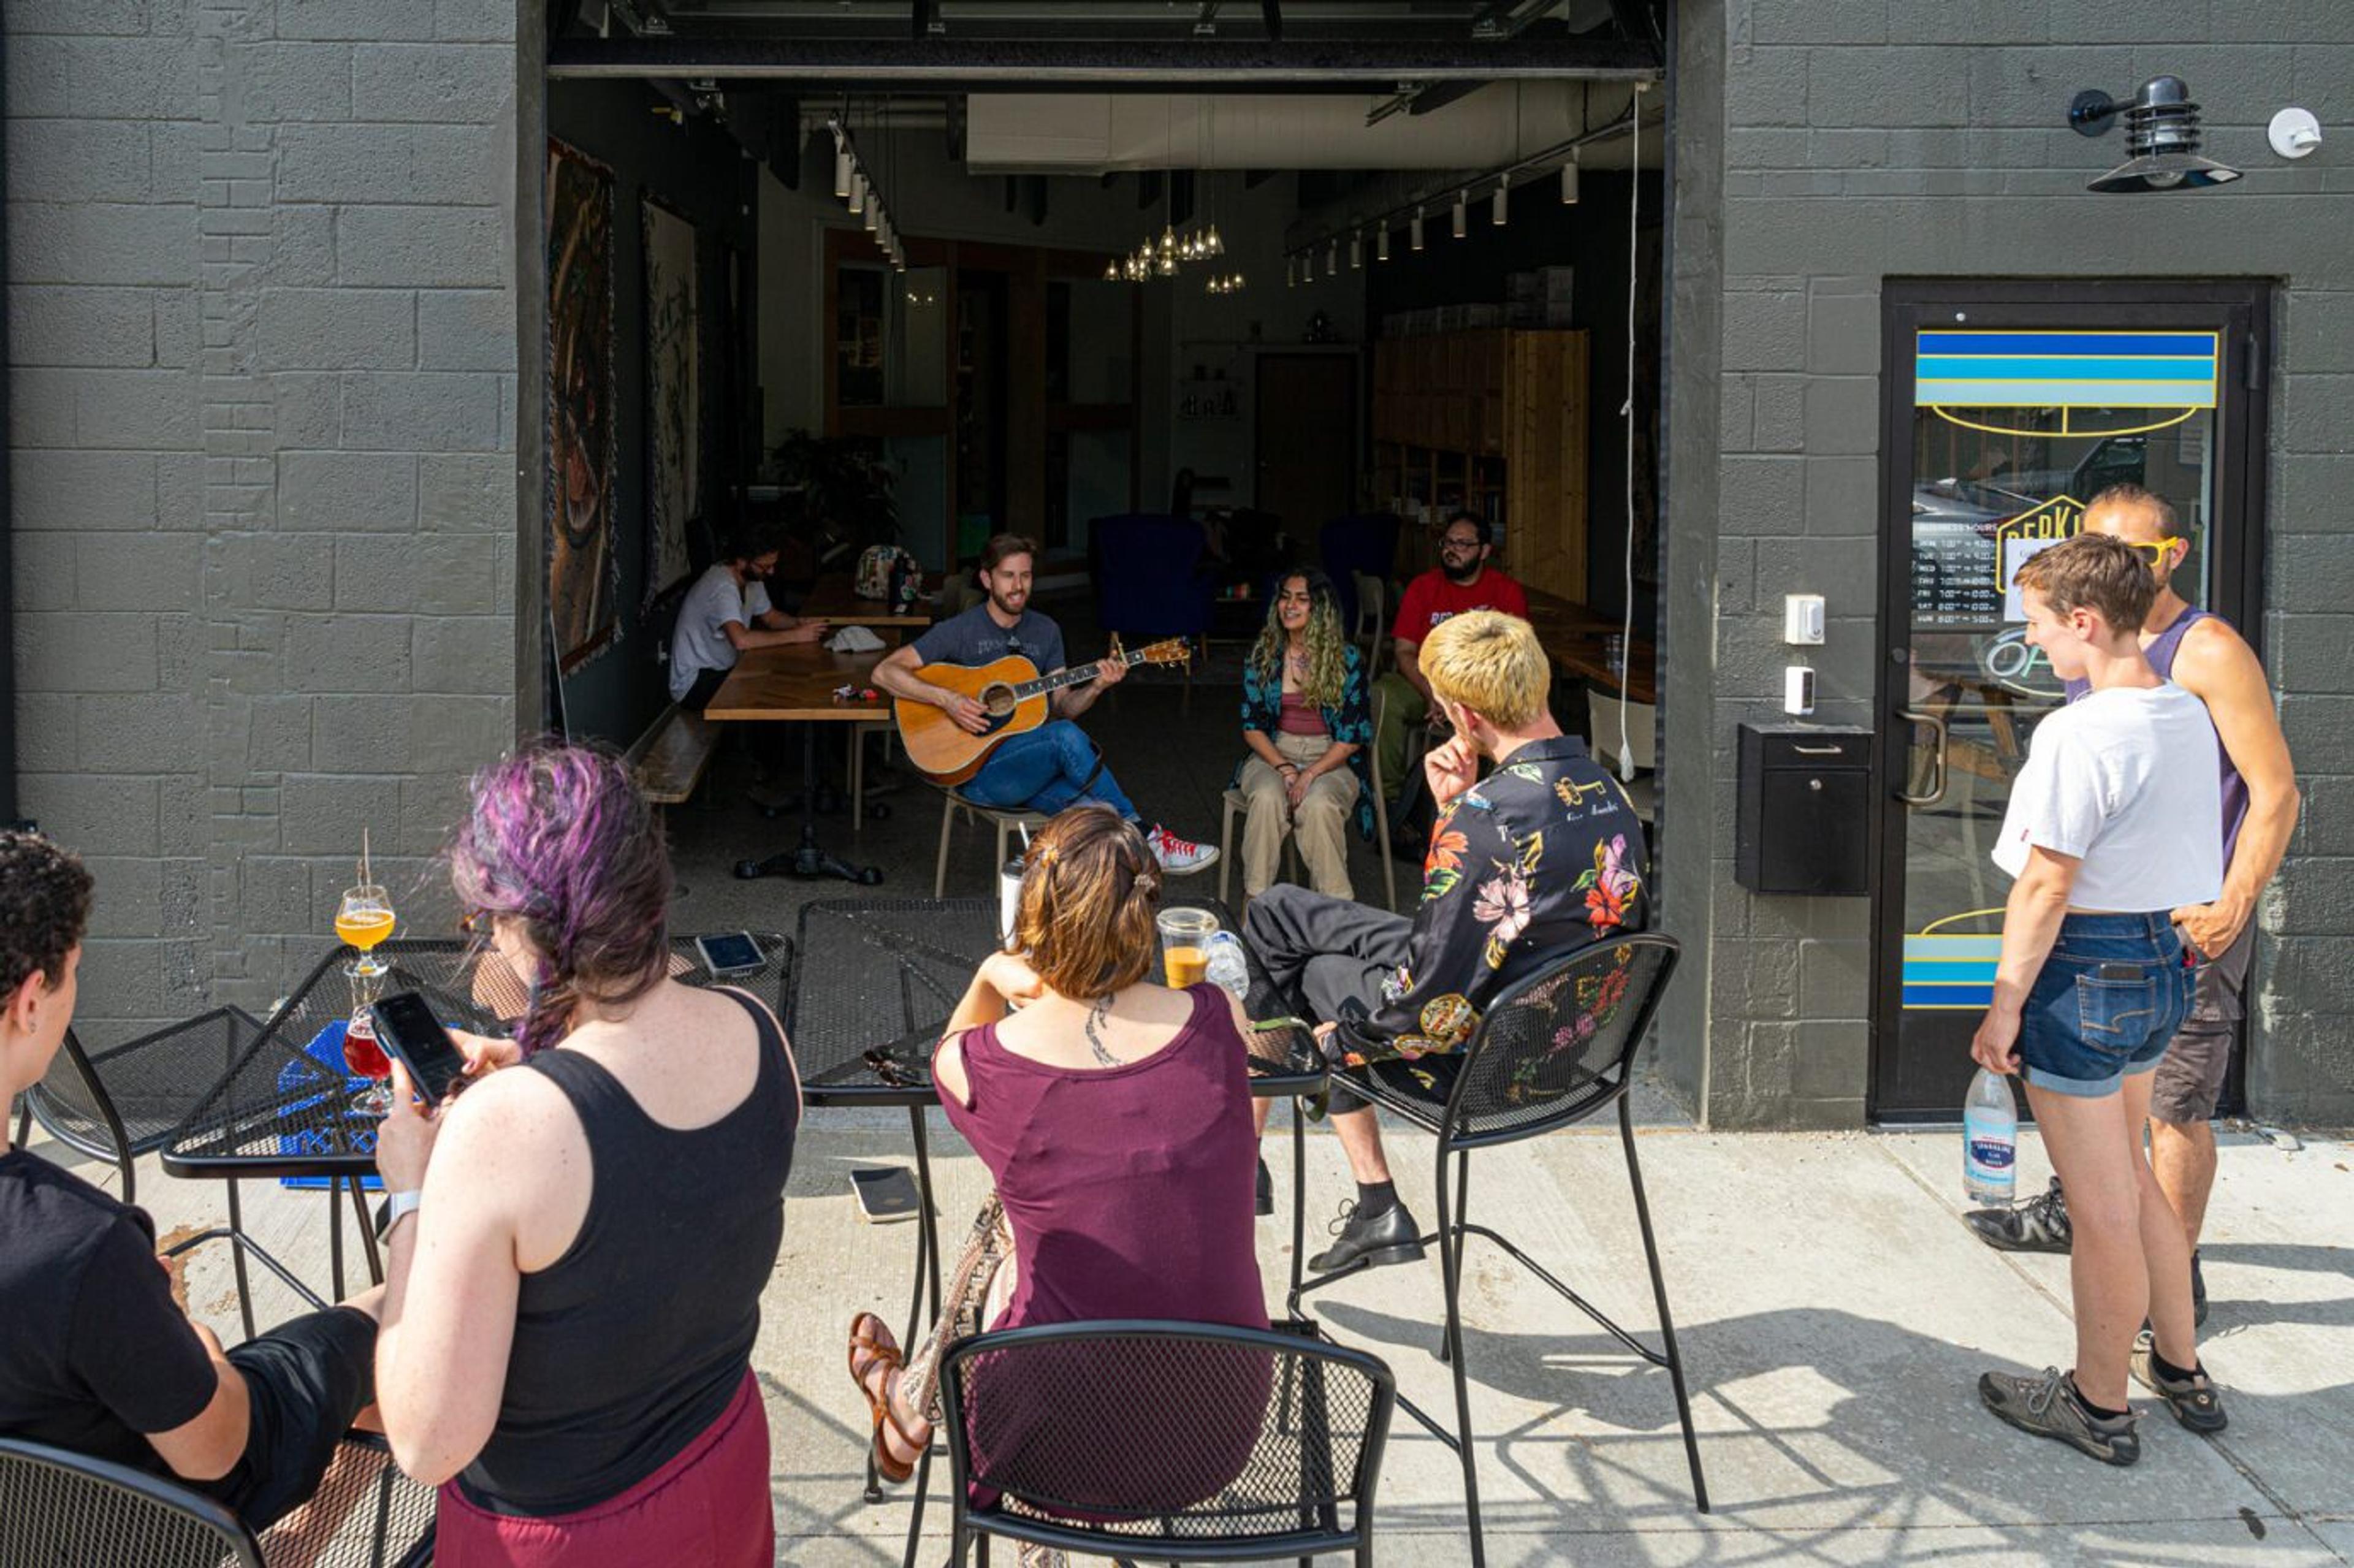 Customers gather outside to talk, laugh, drink and watch live music.